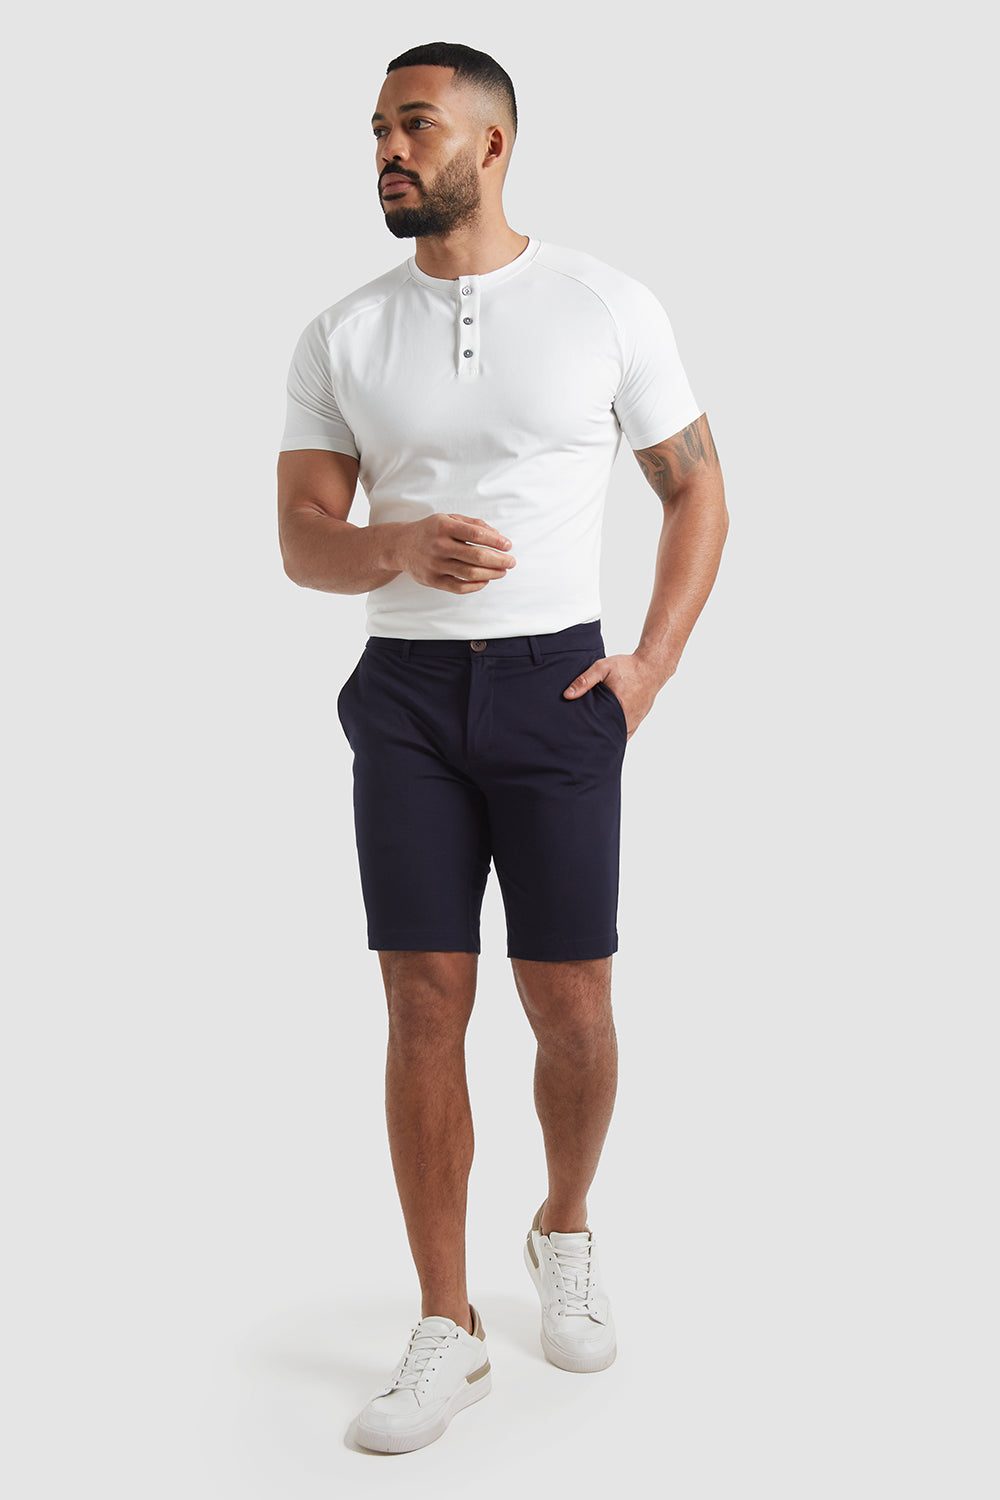 Athletic Fit Chino Navy - TAILORED Shorts USA - ATHLETE in